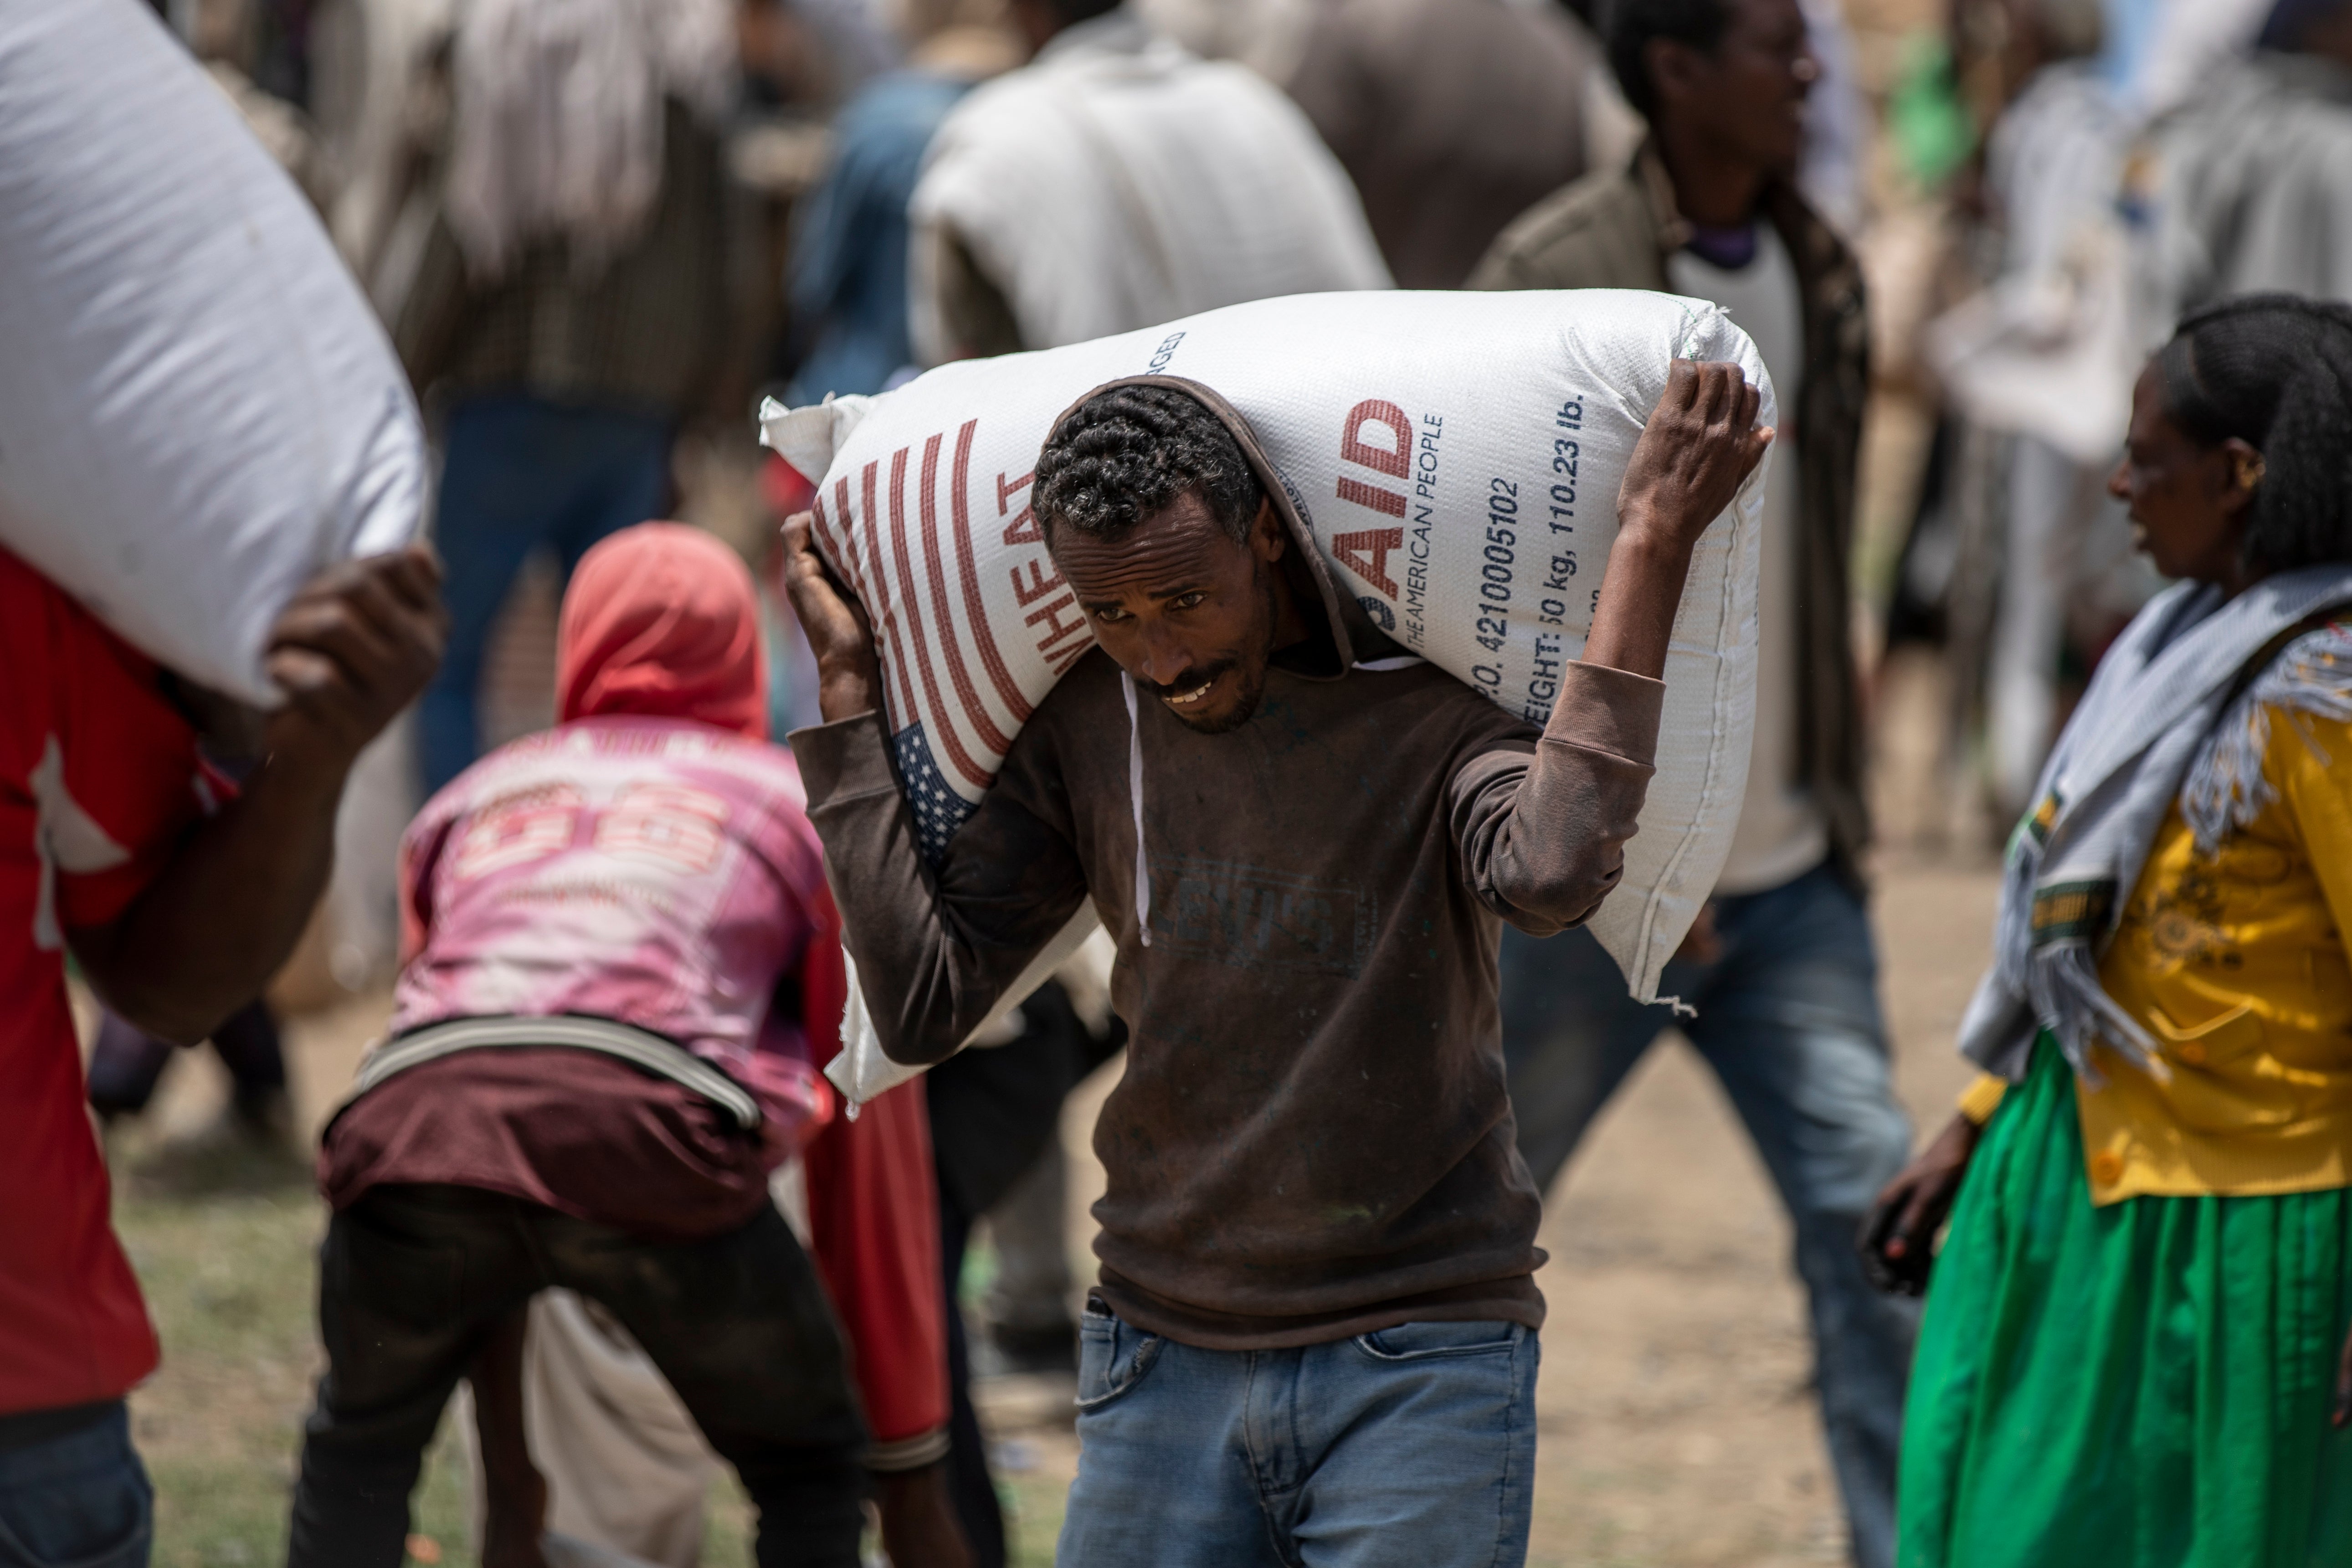 The UN says they have recieved reports of more than 150 people starving to death in the Tigray region